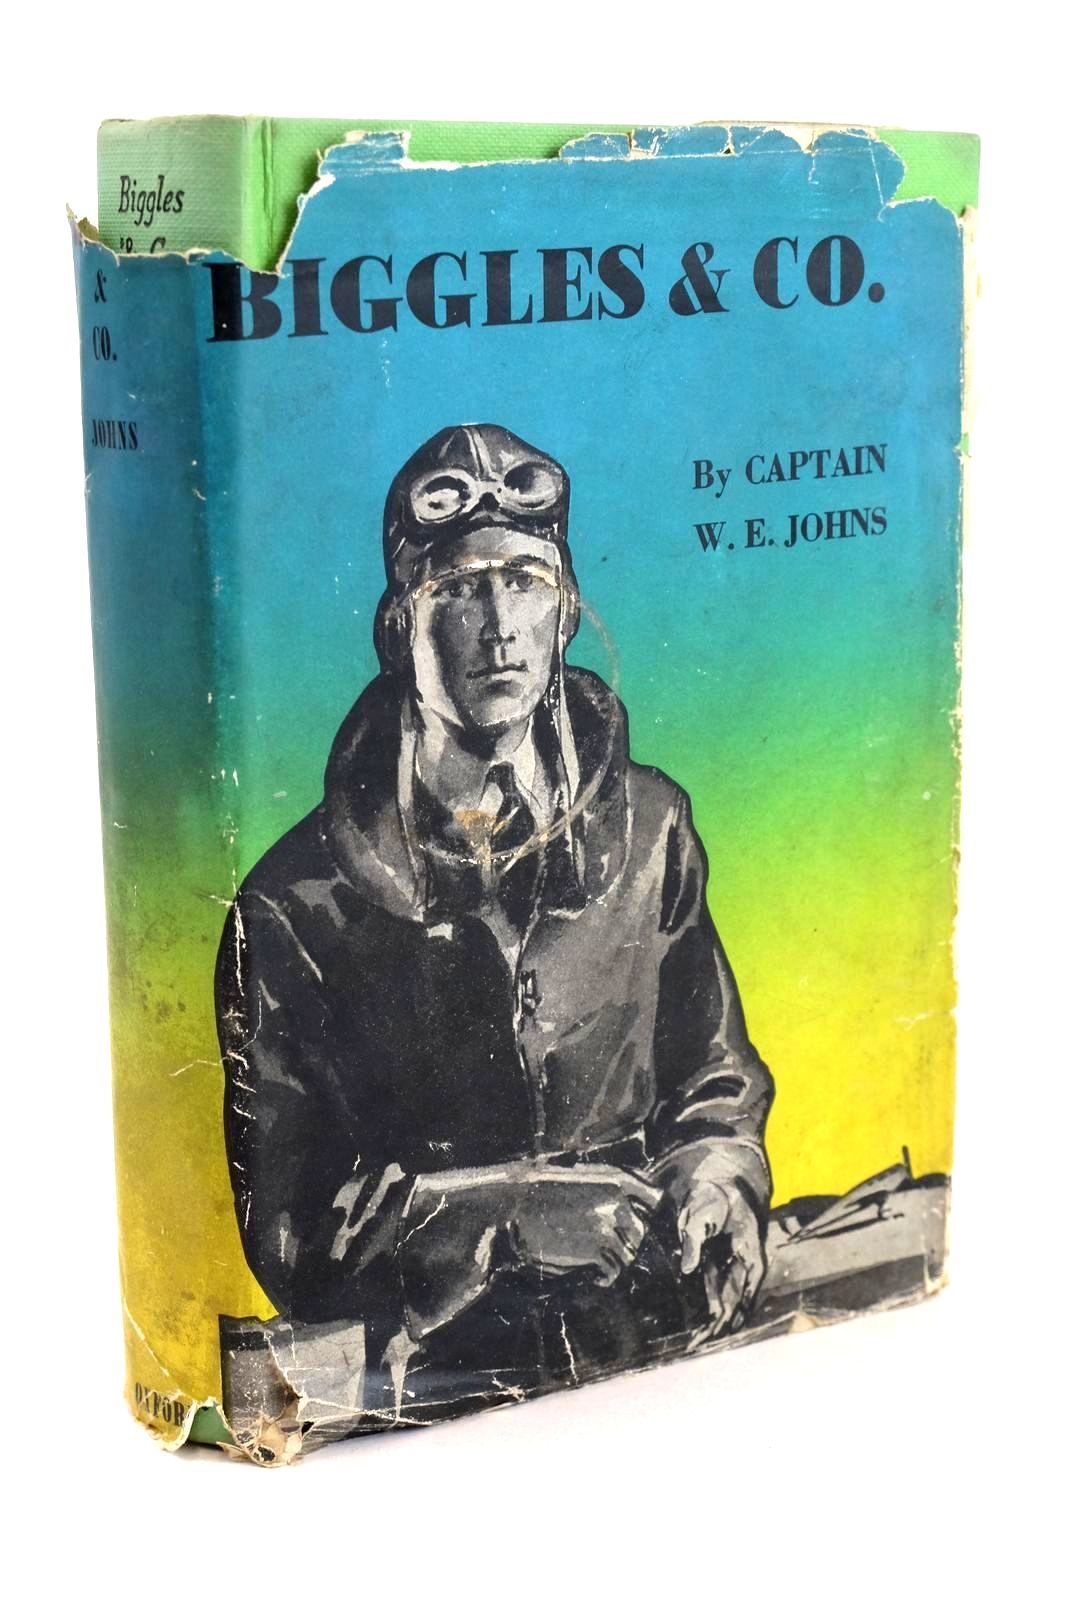 Photo of BIGGLES & CO. written by Johns, W.E. illustrated by Sindall, Alfred published by Oxford University Press, Geoffrey Cumberlege (STOCK CODE: 1326488)  for sale by Stella & Rose's Books